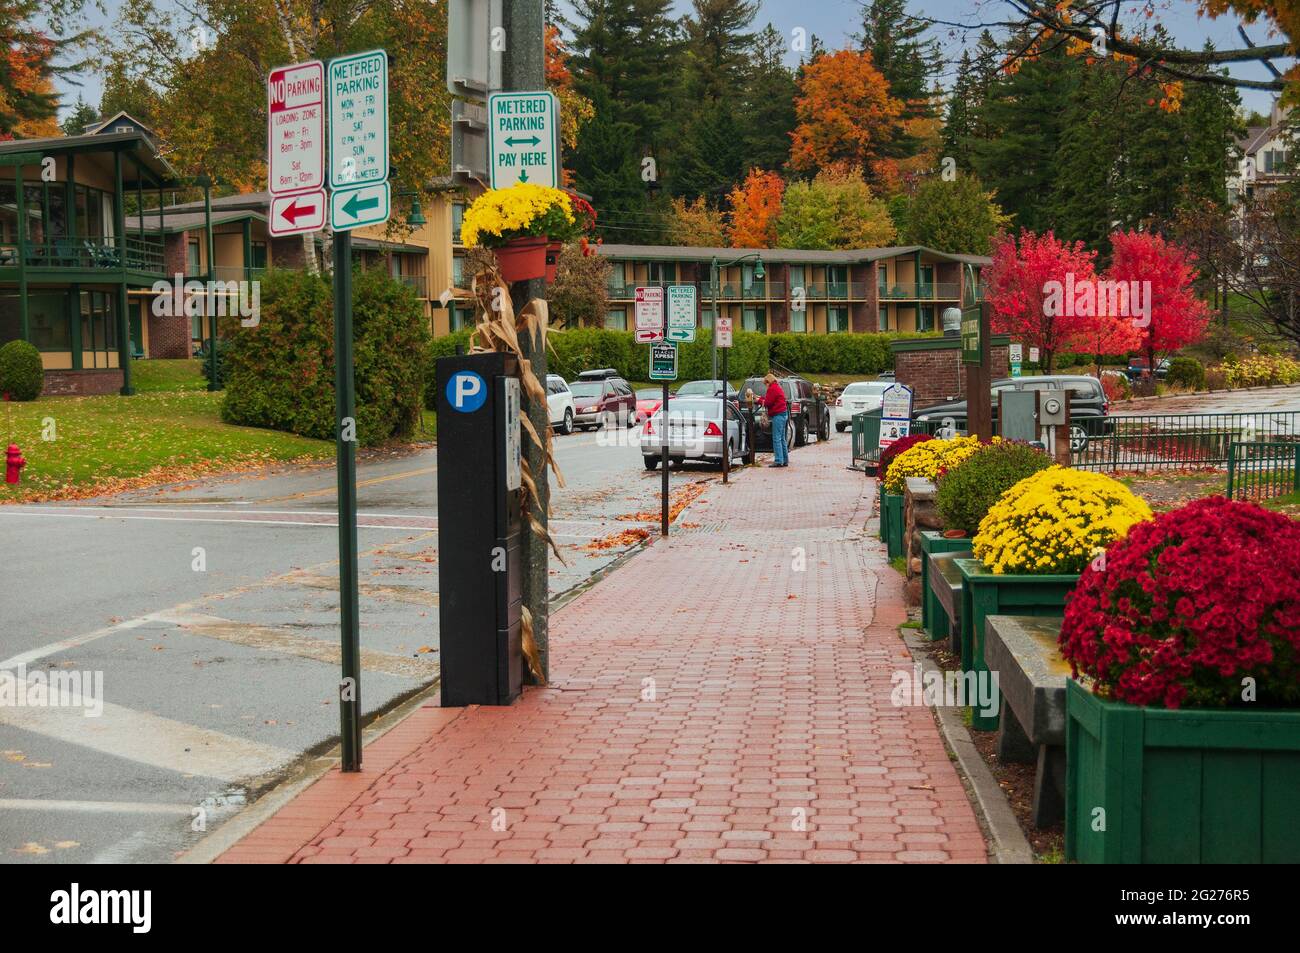 A woman plugs a parking meter on a colorful street with flower boxes in Lake Placid, New York, USA. Stock Photo